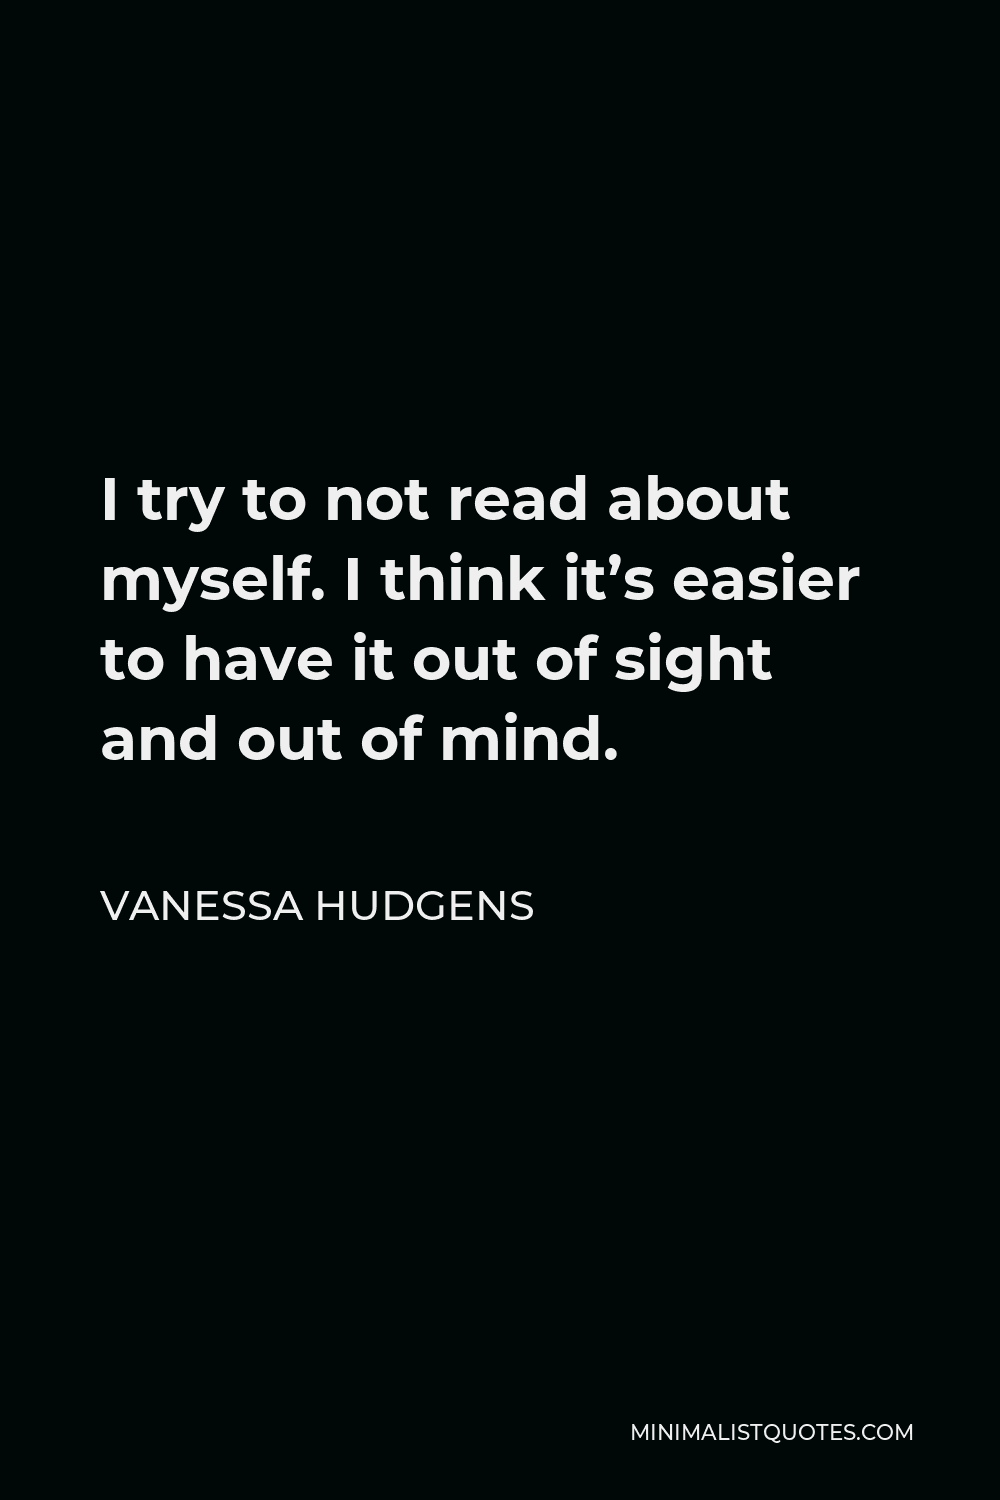 Vanessa Hudgens Quote - I try to not read about myself. I think it’s easier to have it out of sight and out of mind.